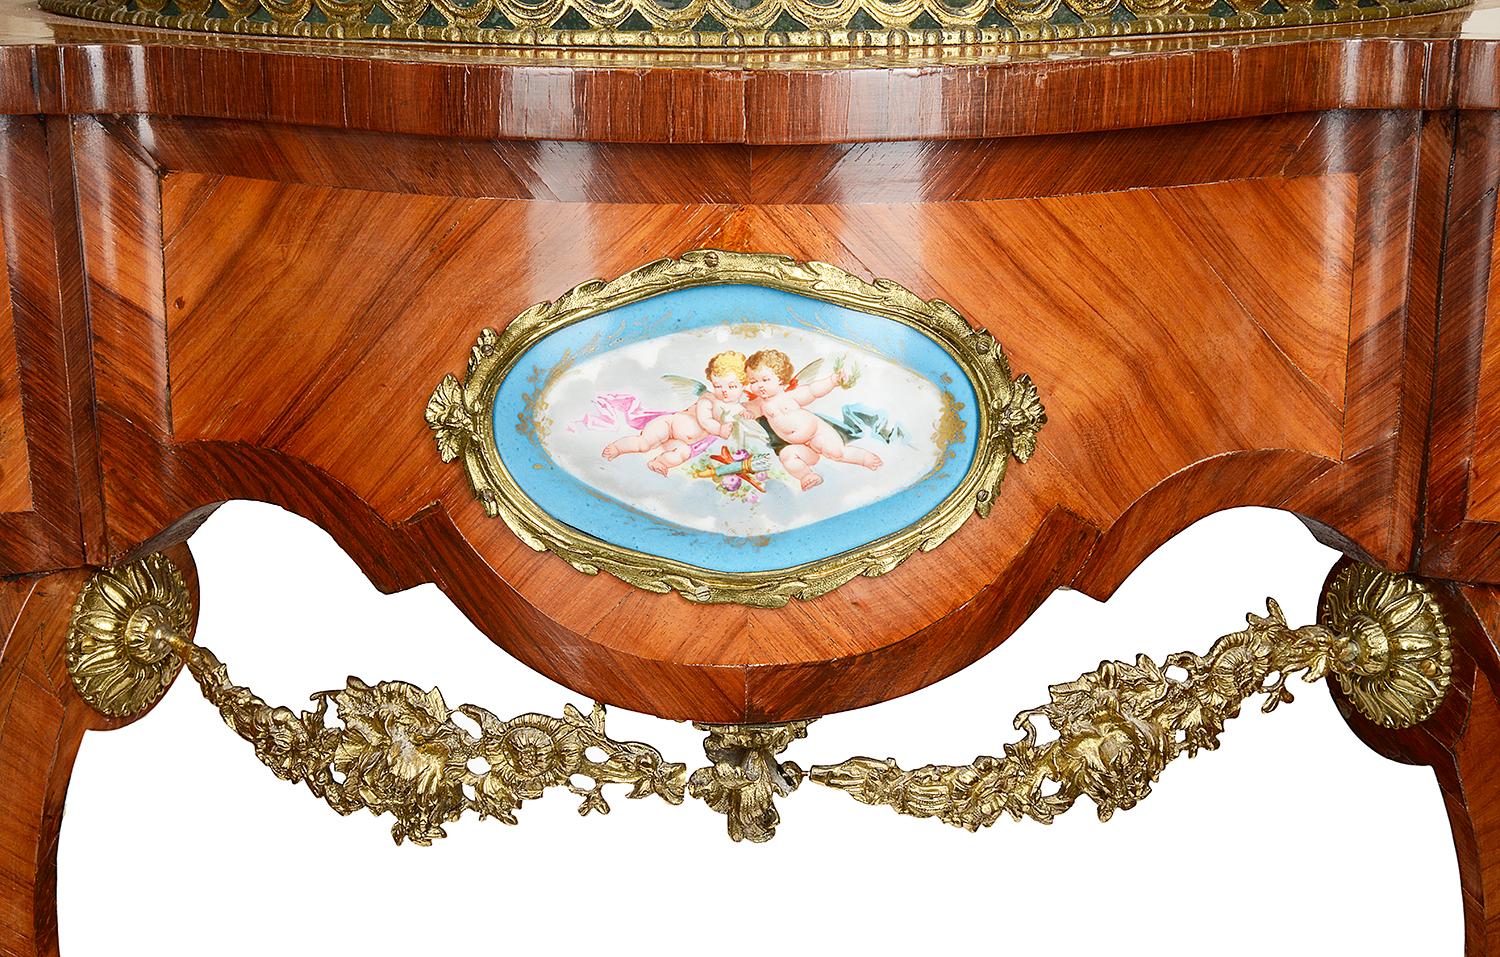 A good quality 19th century French Kingwood jardinière, having gilded ormolu mounts and swags, Sevres style porcelain plaques and raised on elegant scrolling cabriole legs.